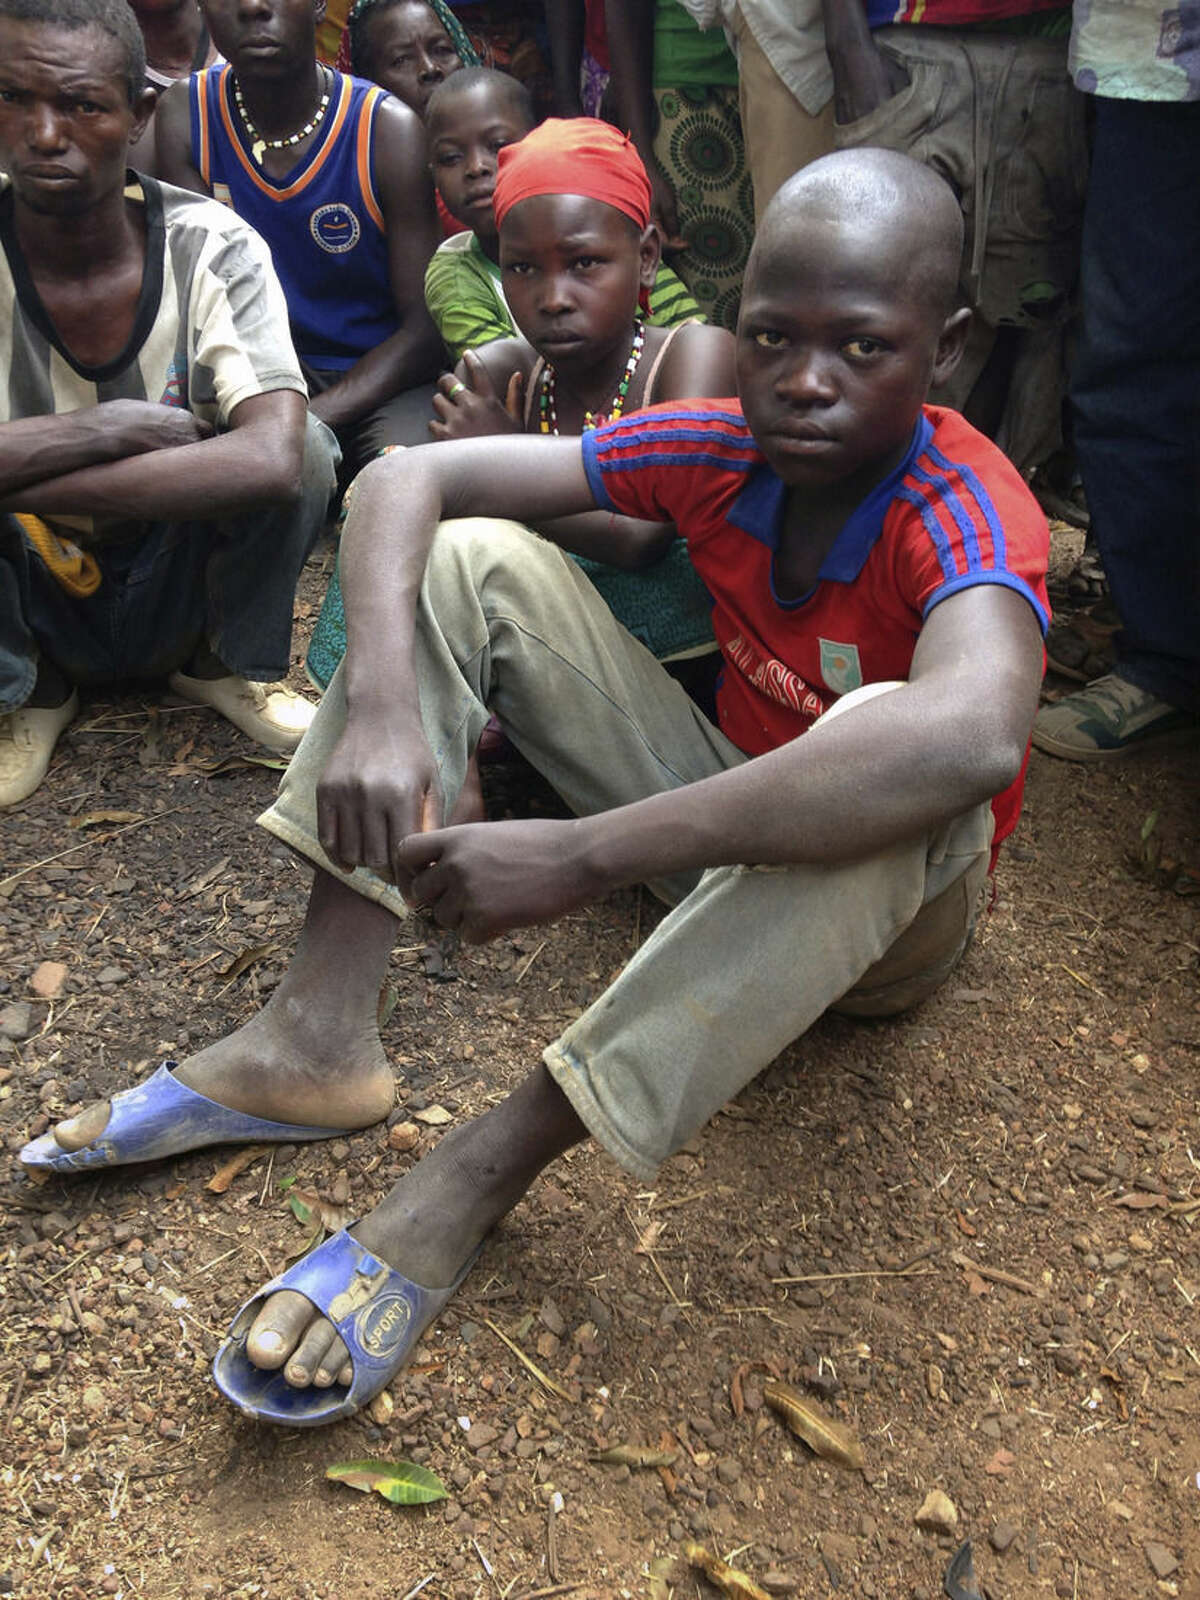 In this Feb. 27, 2014, photo, survivor Maximin Lassananyant, 13, sits with his father and other relatives in the village of Nzakoun, Central African Republic. Lassananyant said that he ran for his life the night Muslim rebels attacked the village of Nzakoun on Feb. 3. His mother, brother and sister were among the 23 dead while he survived by hiding in the countryside until the rebels left. His father, looks on at left. (AP Photo/Krista Larson)